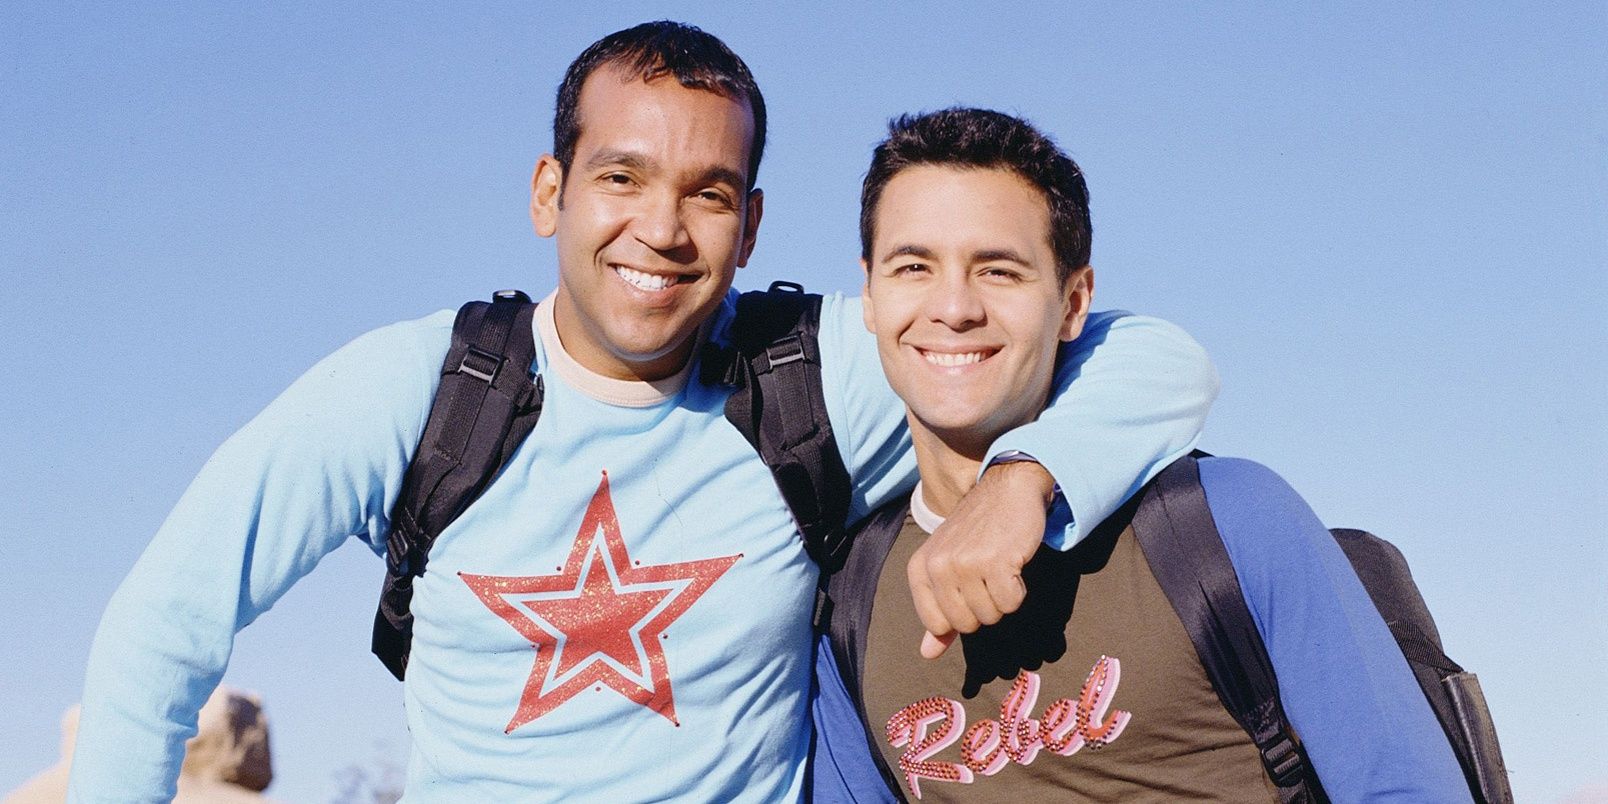 Danny And Oswald in The Amazing Race